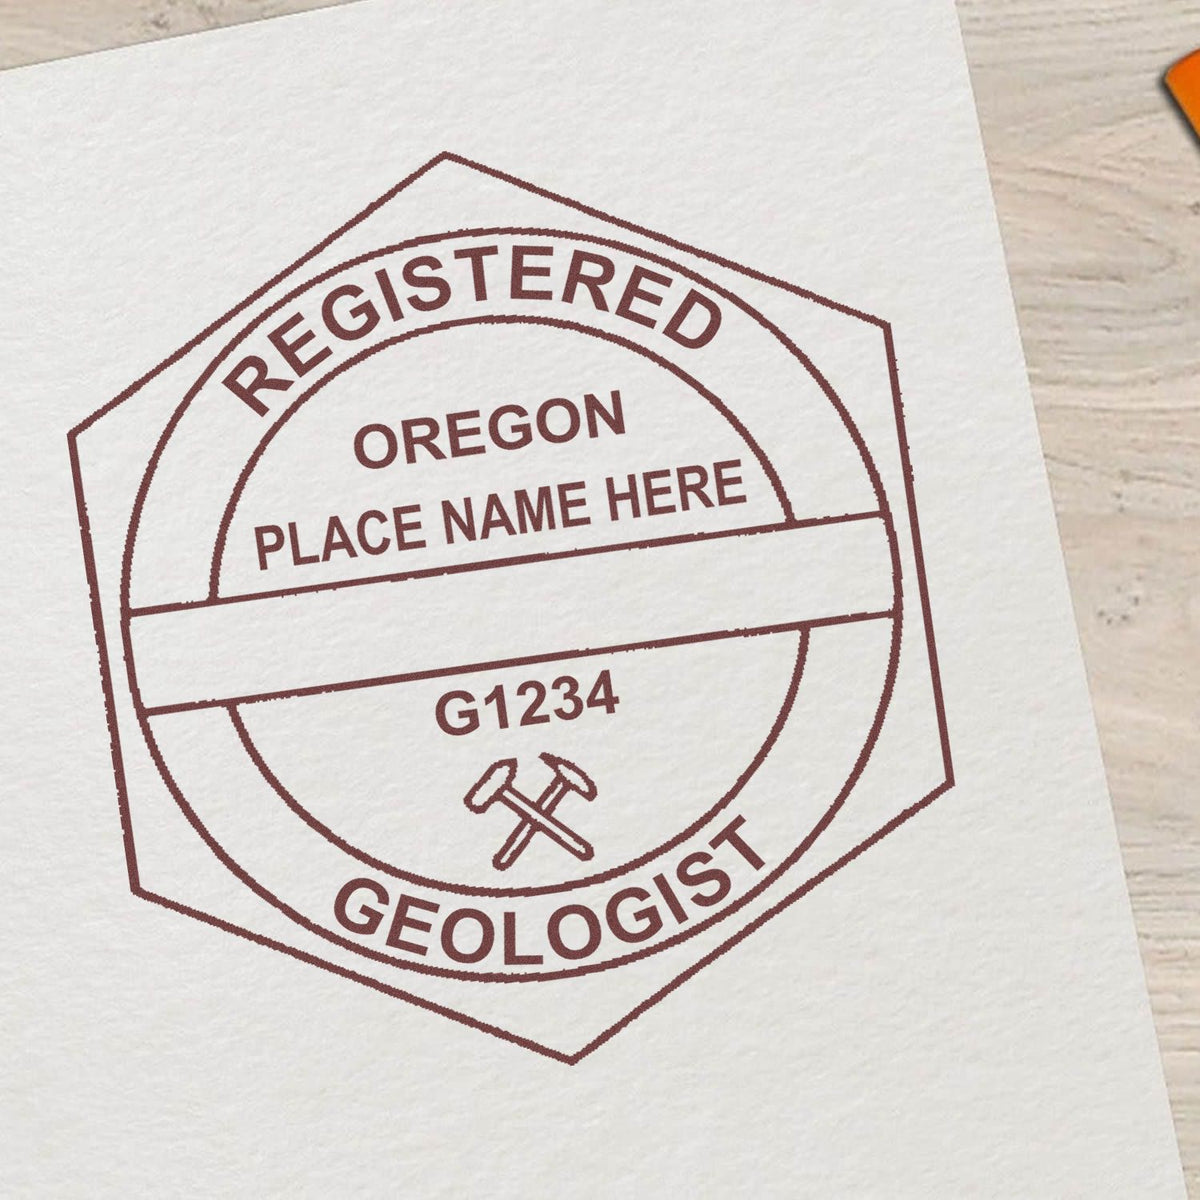 Another Example of a stamped impression of the Slim Pre-Inked Oregon Professional Geologist Seal Stamp on a office form